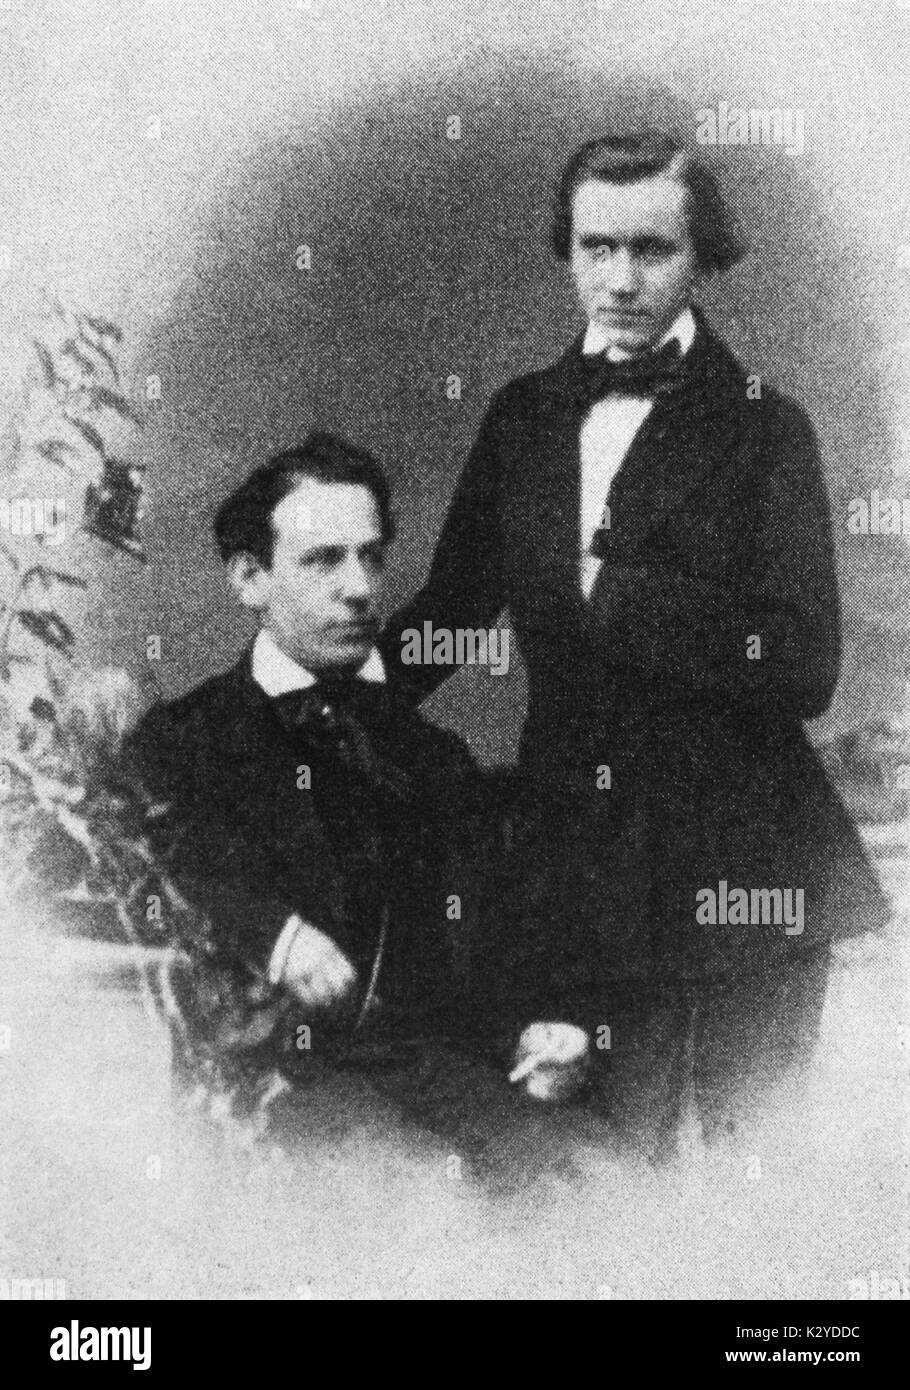 Johannes Brahms - portrait of the German composer with the Hungarian violinist Eduard Reményi, 1853. JB: 7 May 1833 - 3 April 1897. ER: 17 January 1828 - 15 May 1898. Also known as Ede Remenyi or Eduard Hoffmann. Stock Photo